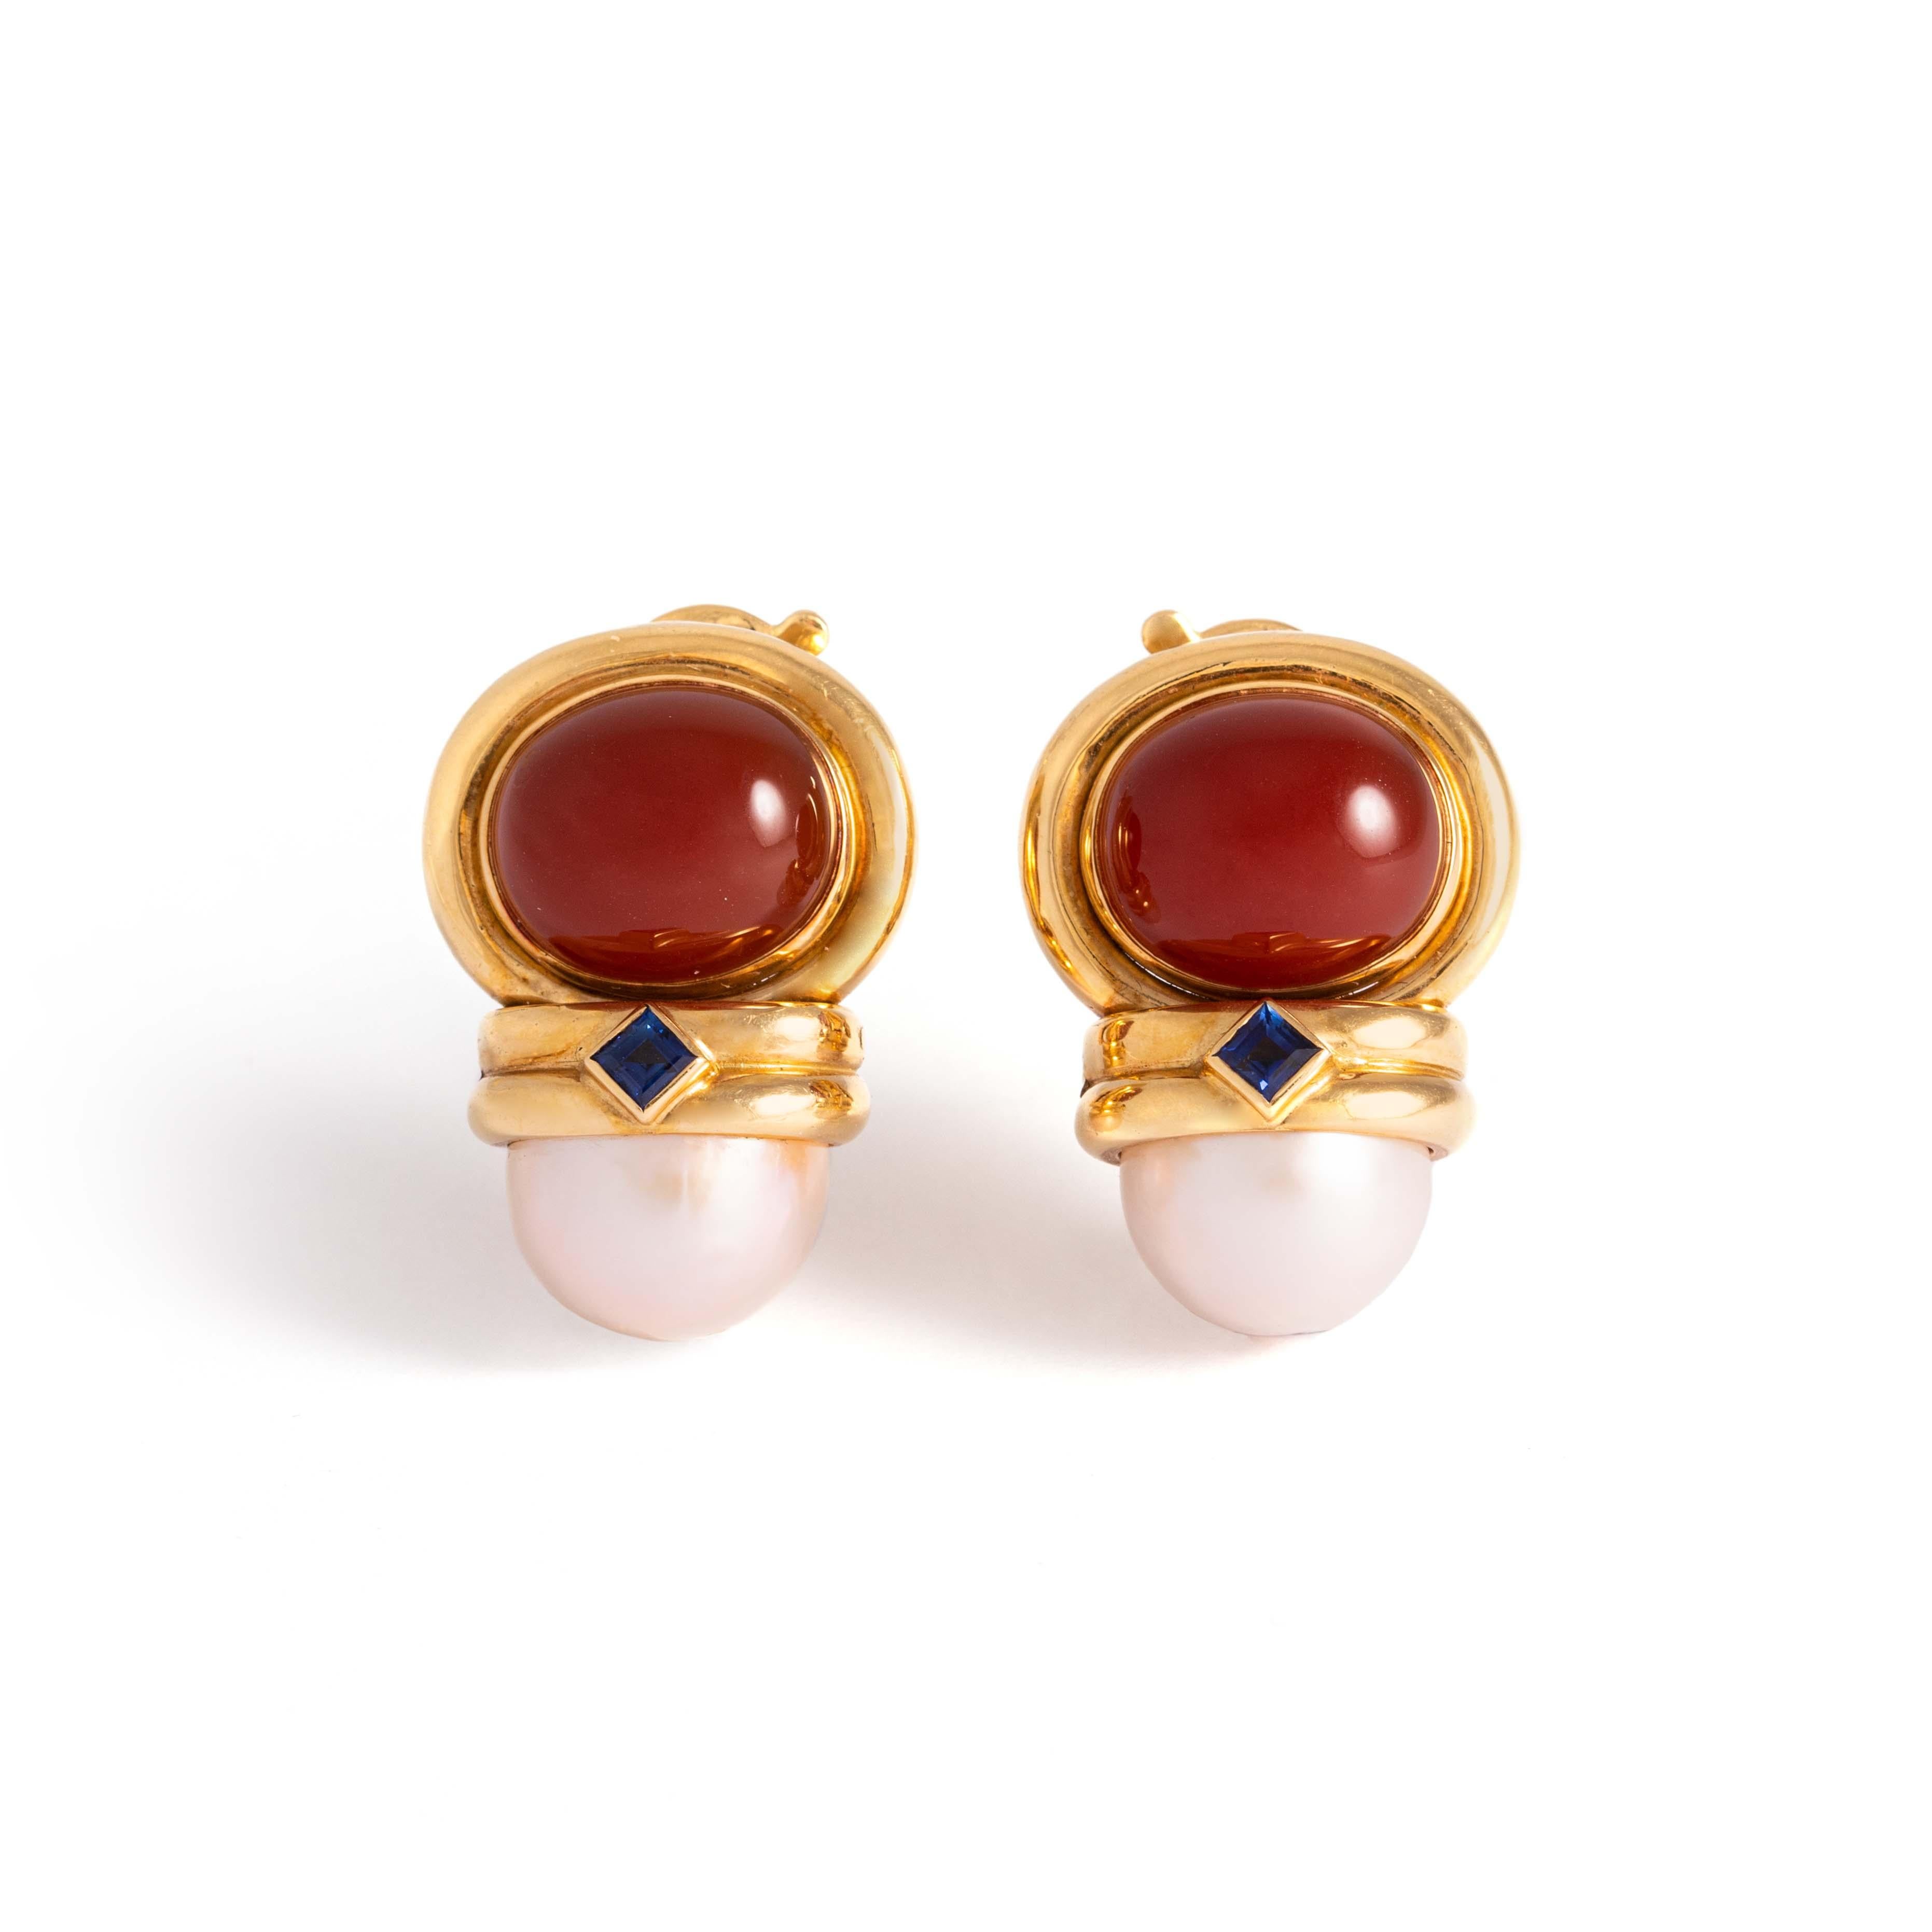 Benoit de Gorski. Pair of 18K earrings with cabochon-cut carnelians, blue stones and cultured pearls. Signed Benoit de Gorski, GENEVE.
Dimensions: 2.70 centimeters x 2.00 centimeters. 
Gross weight: 30.72 grams.